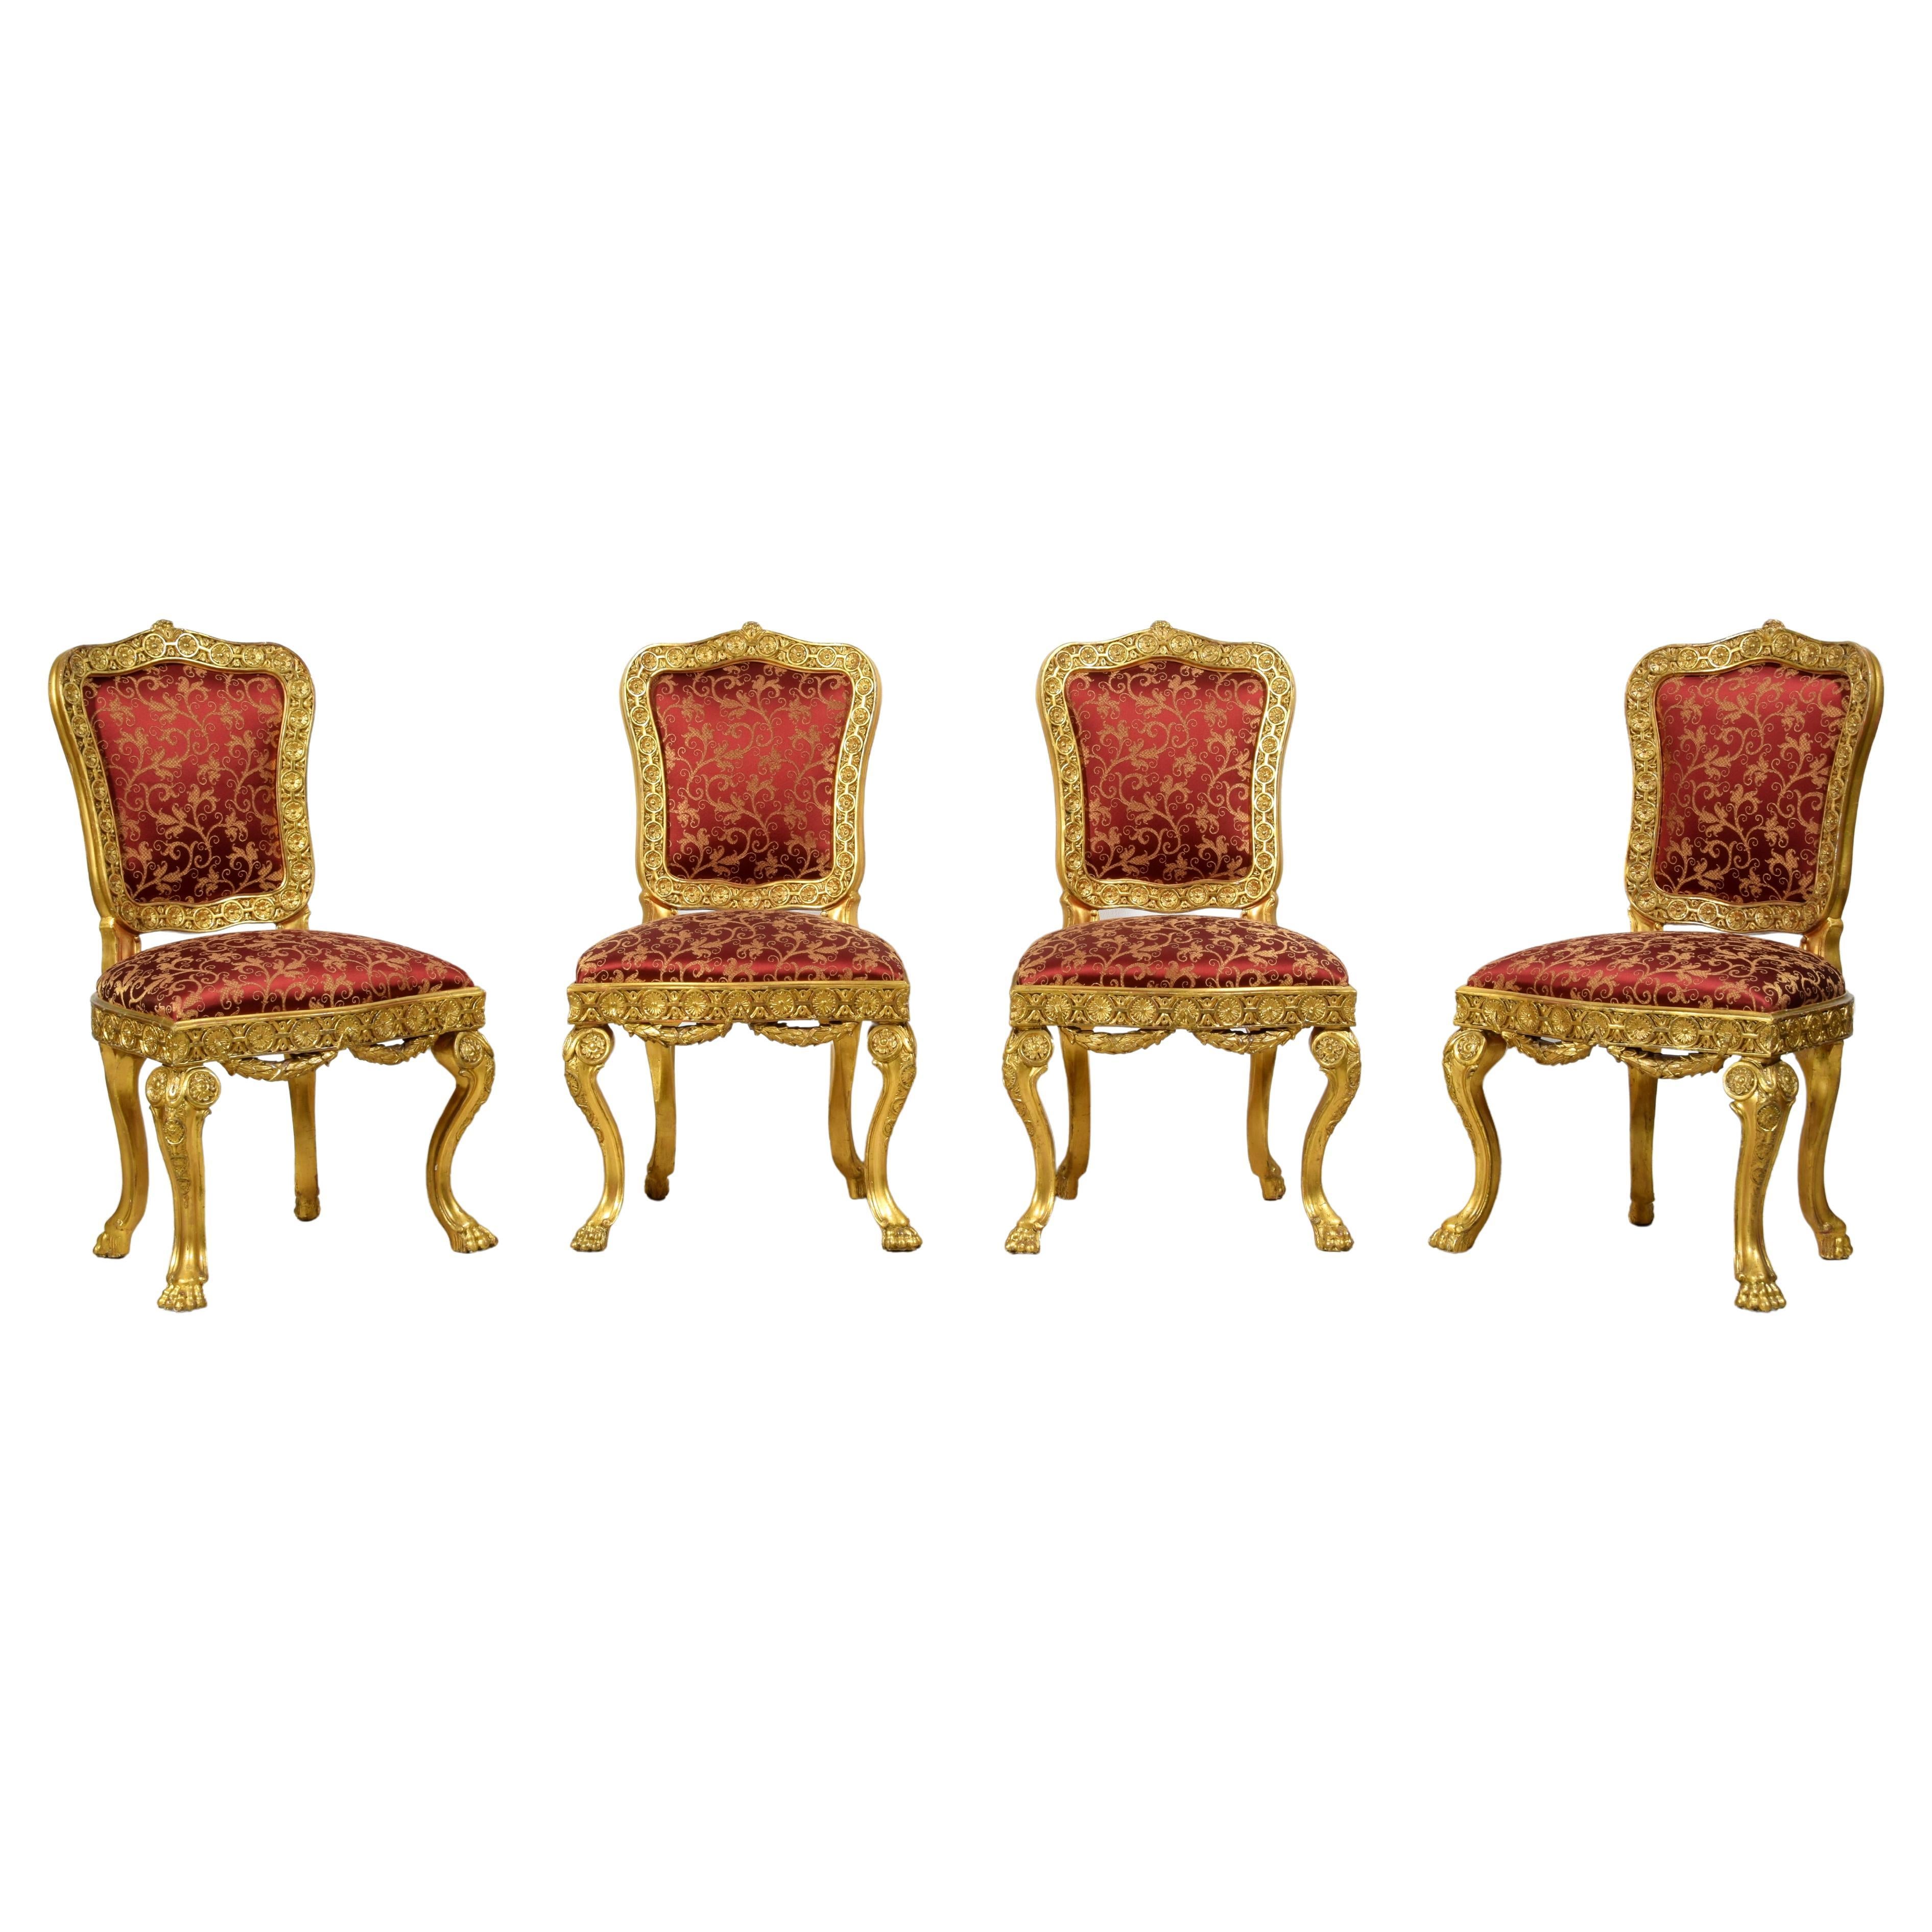 18th Century Four Italian Baroque Carved Giltwood Chairs For Sale